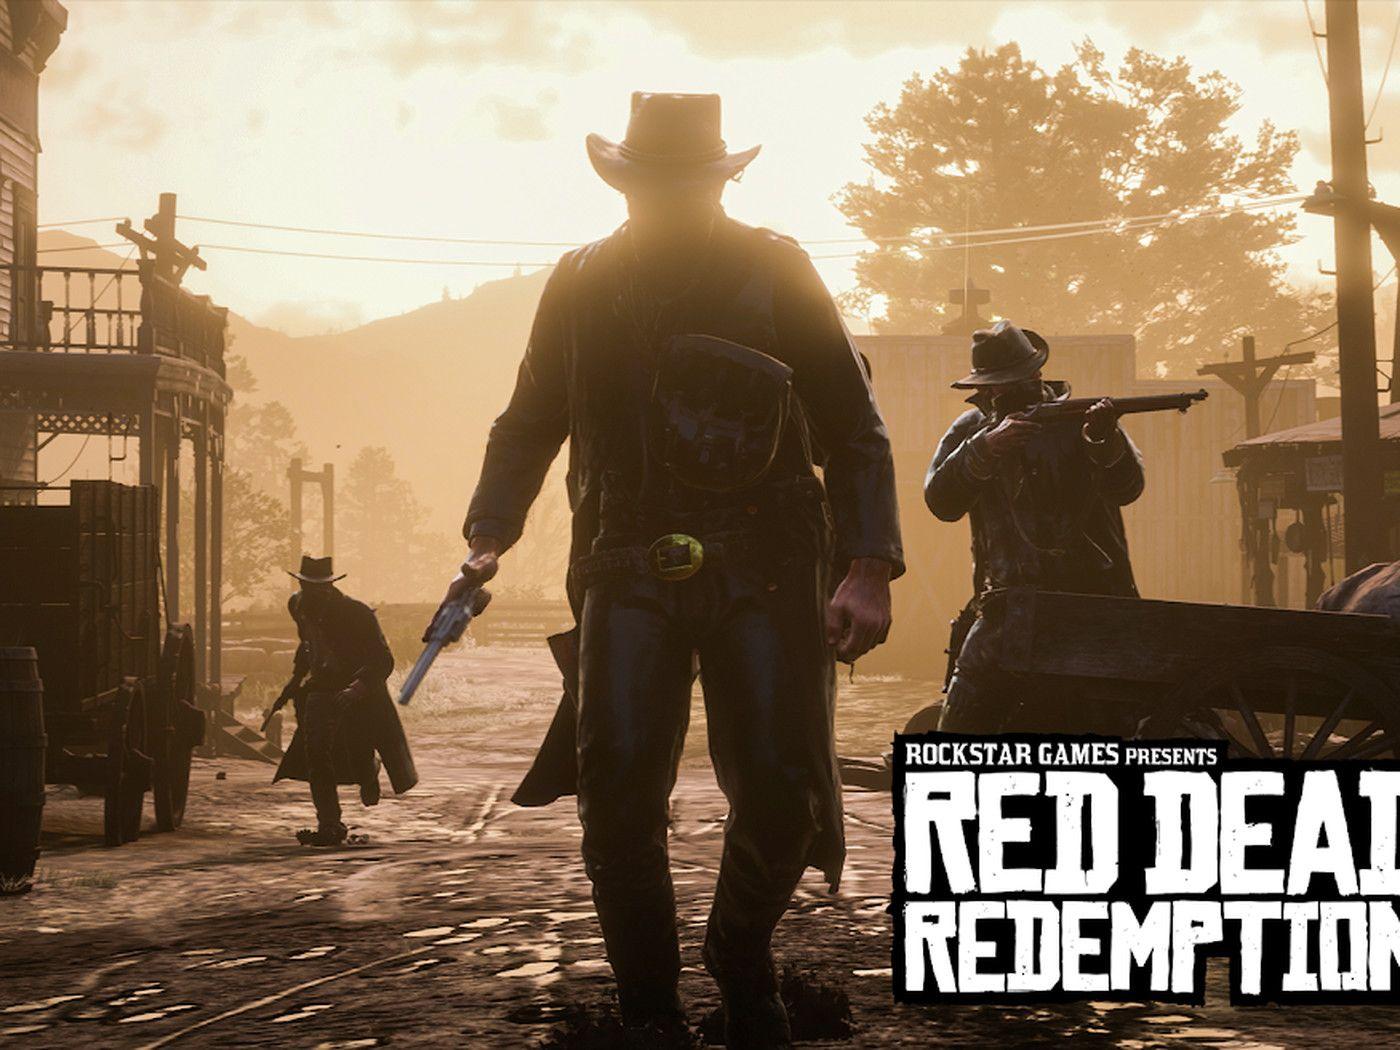 Red Dead Redemption 2's new trailer is six minutes of pure gameplay